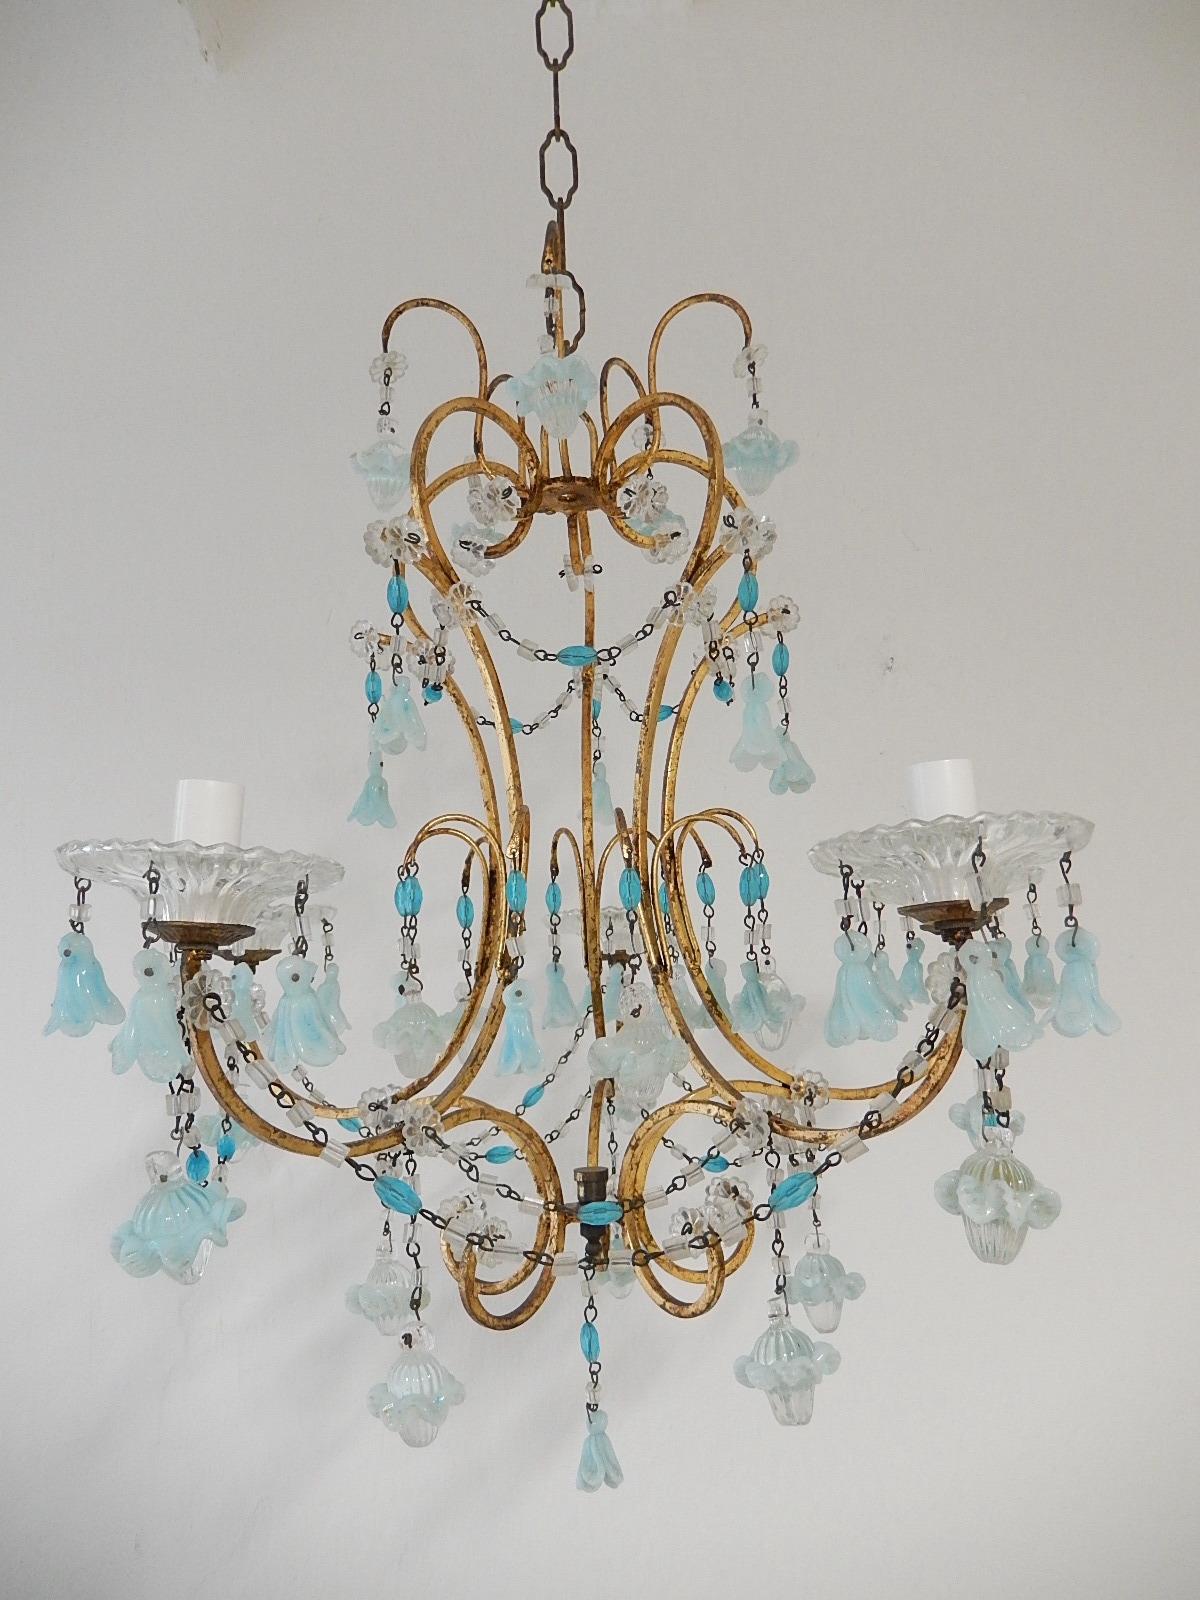 Crystal French Aqua Blue Opaline Murano Bell Flowers & Ribbons Chandelier, circa 1900 For Sale